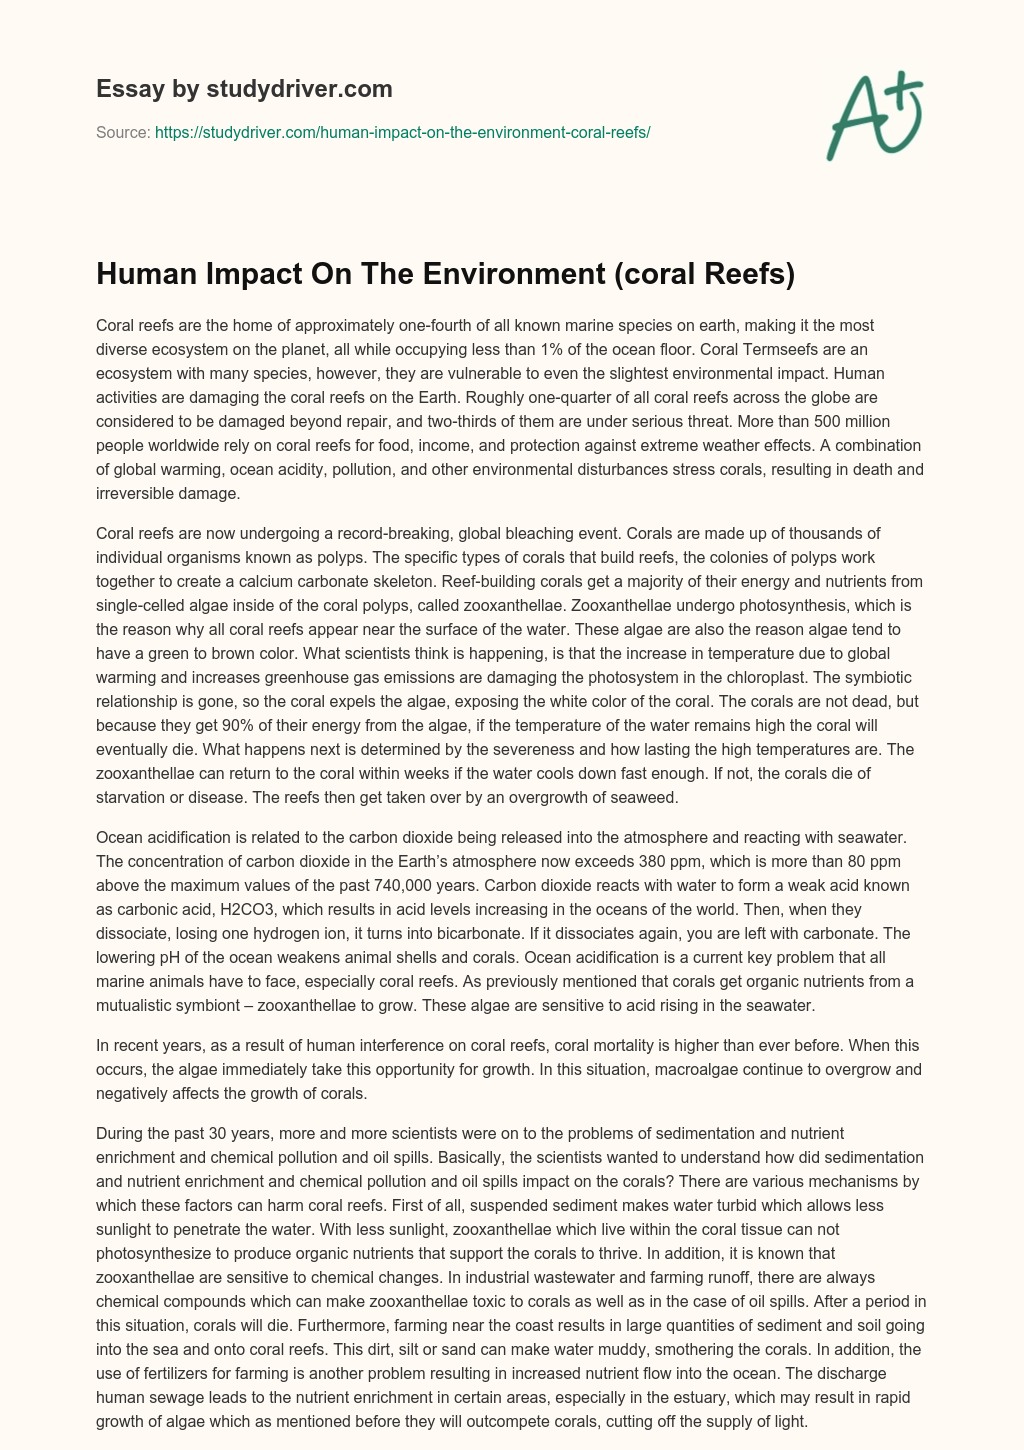 Human Impact on the Environment (coral Reefs) essay